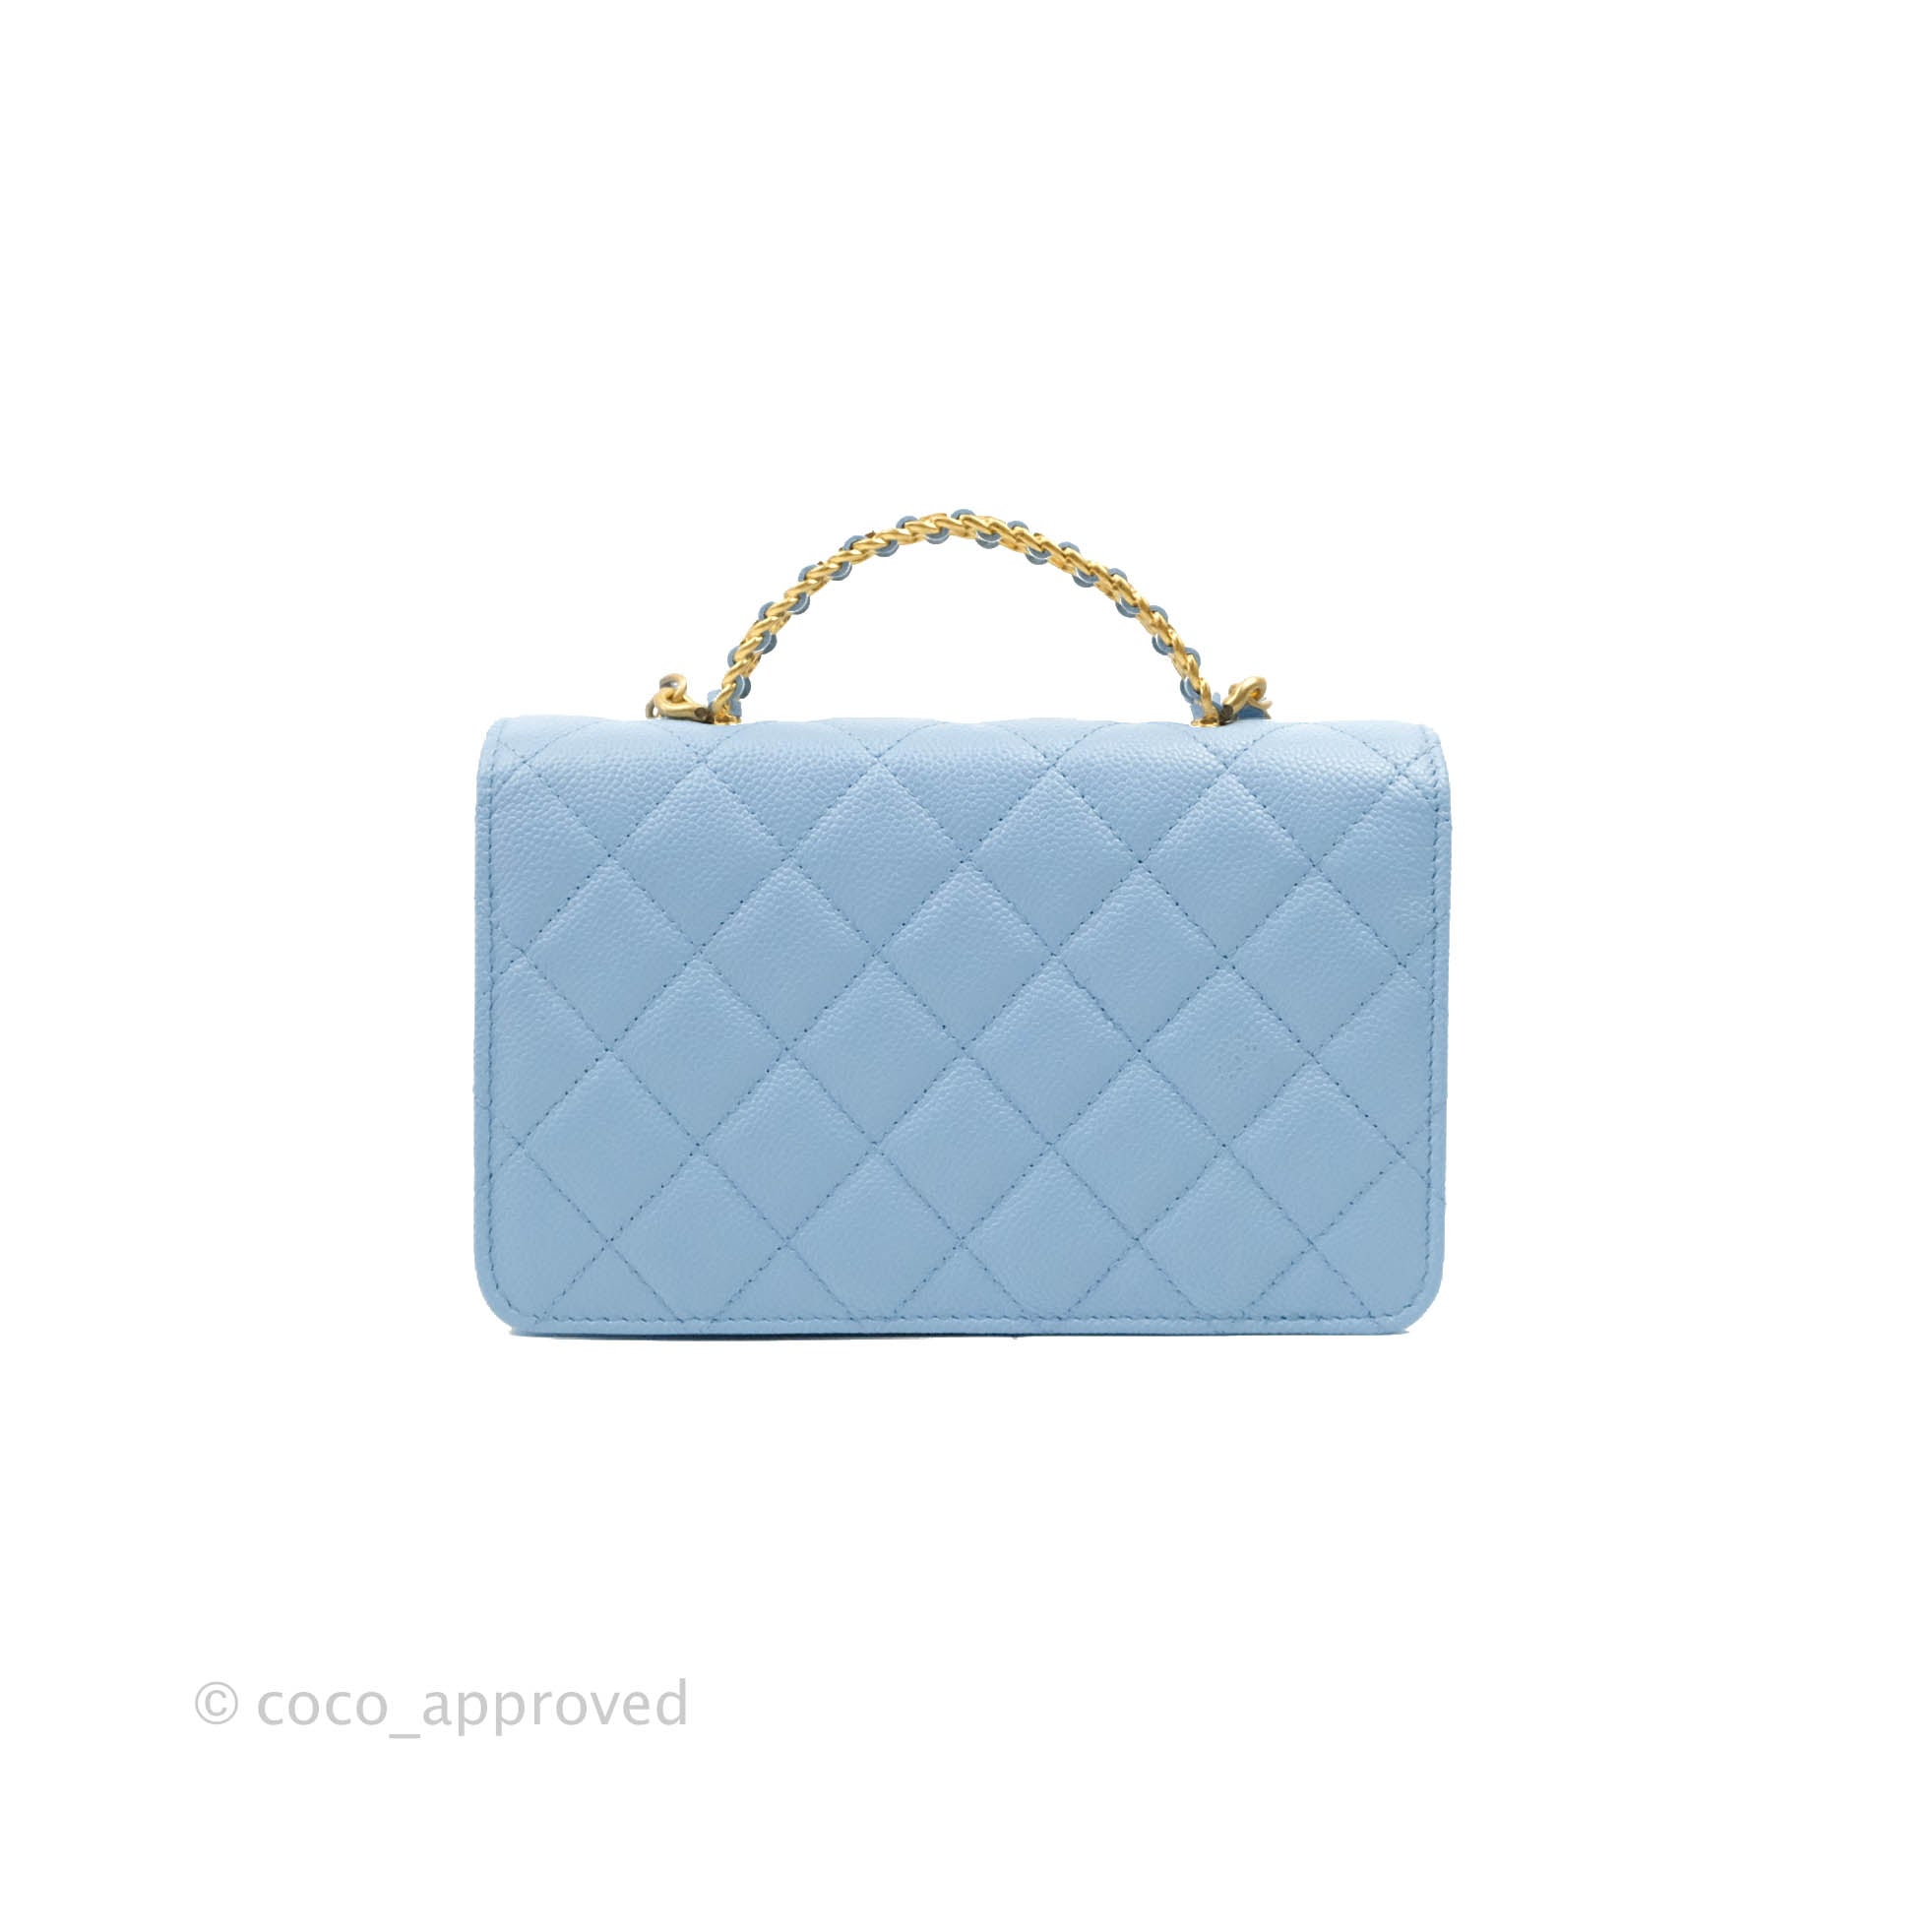 blue and white chanel bag new